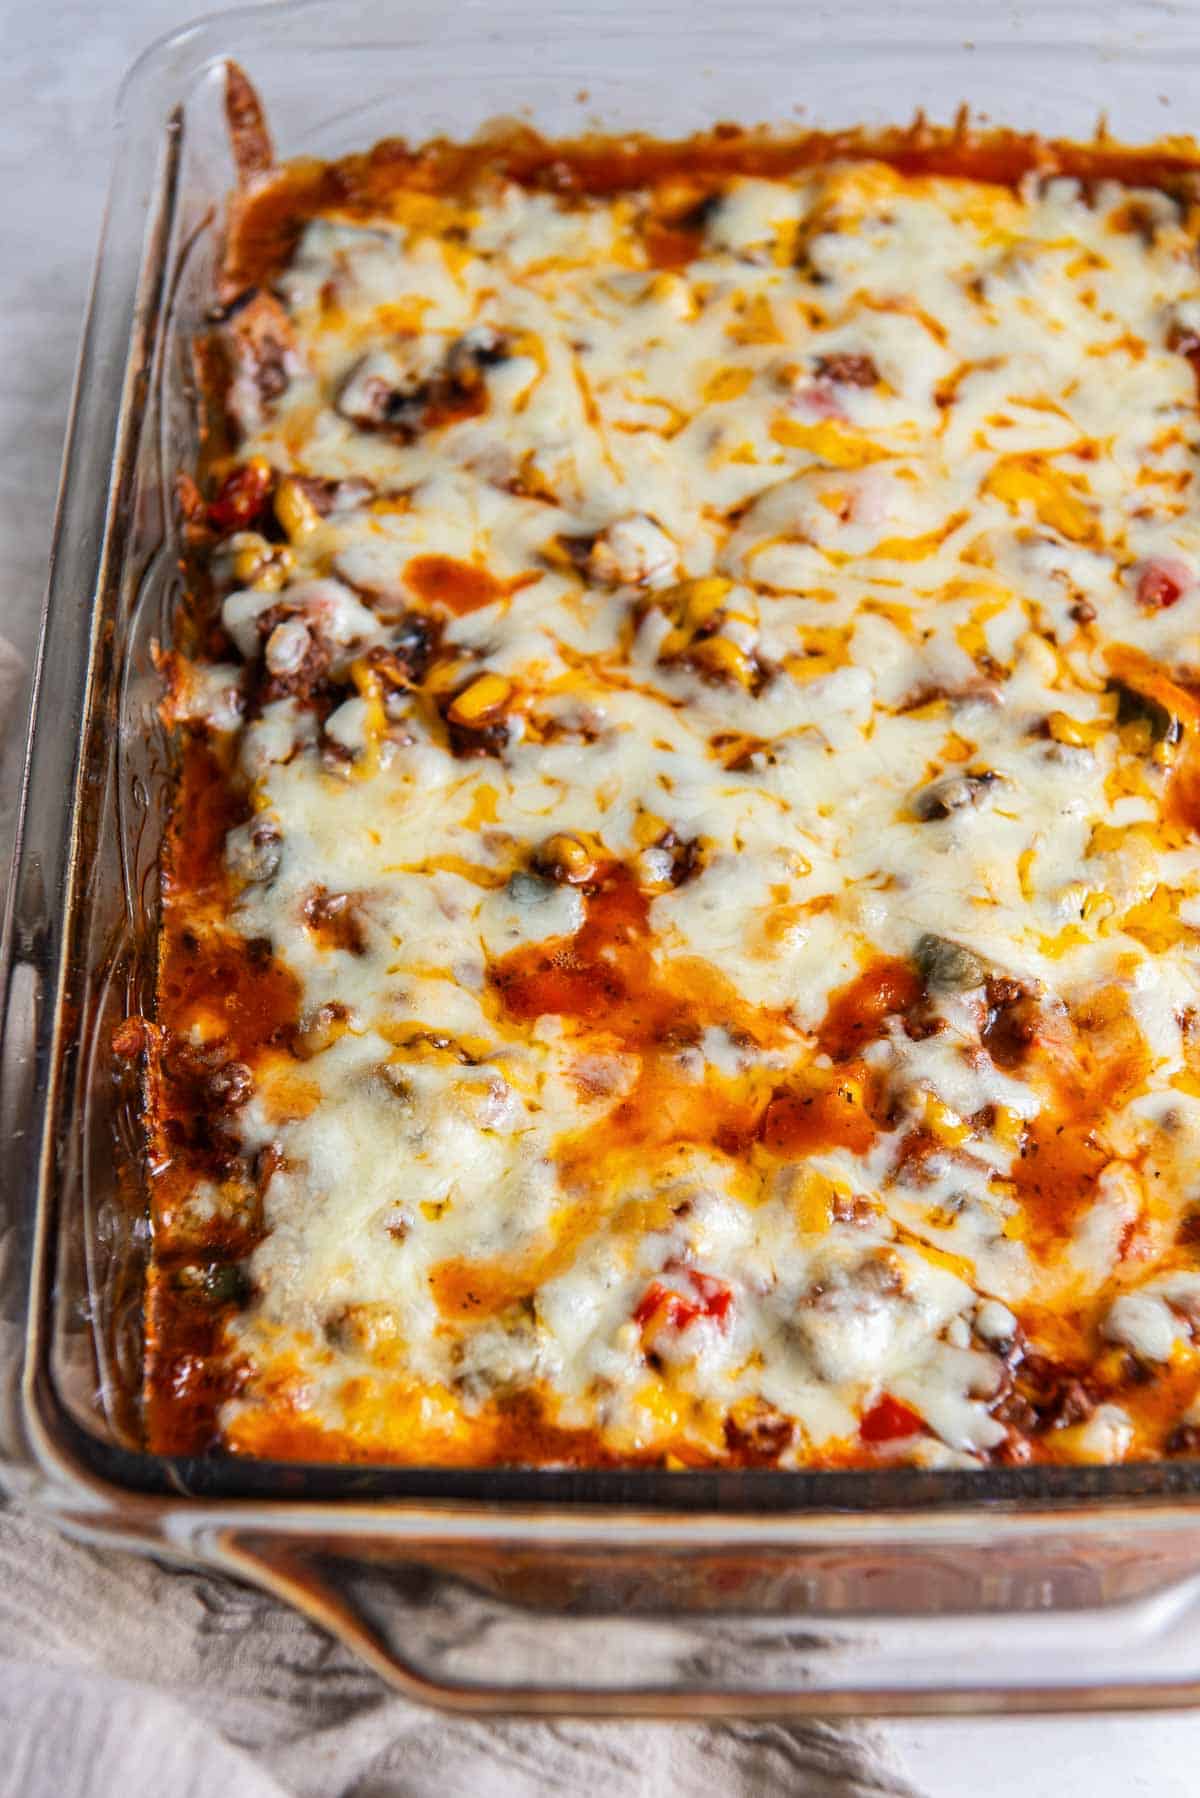 Zucchini pizza casserole with melted cheese in a baking dish.